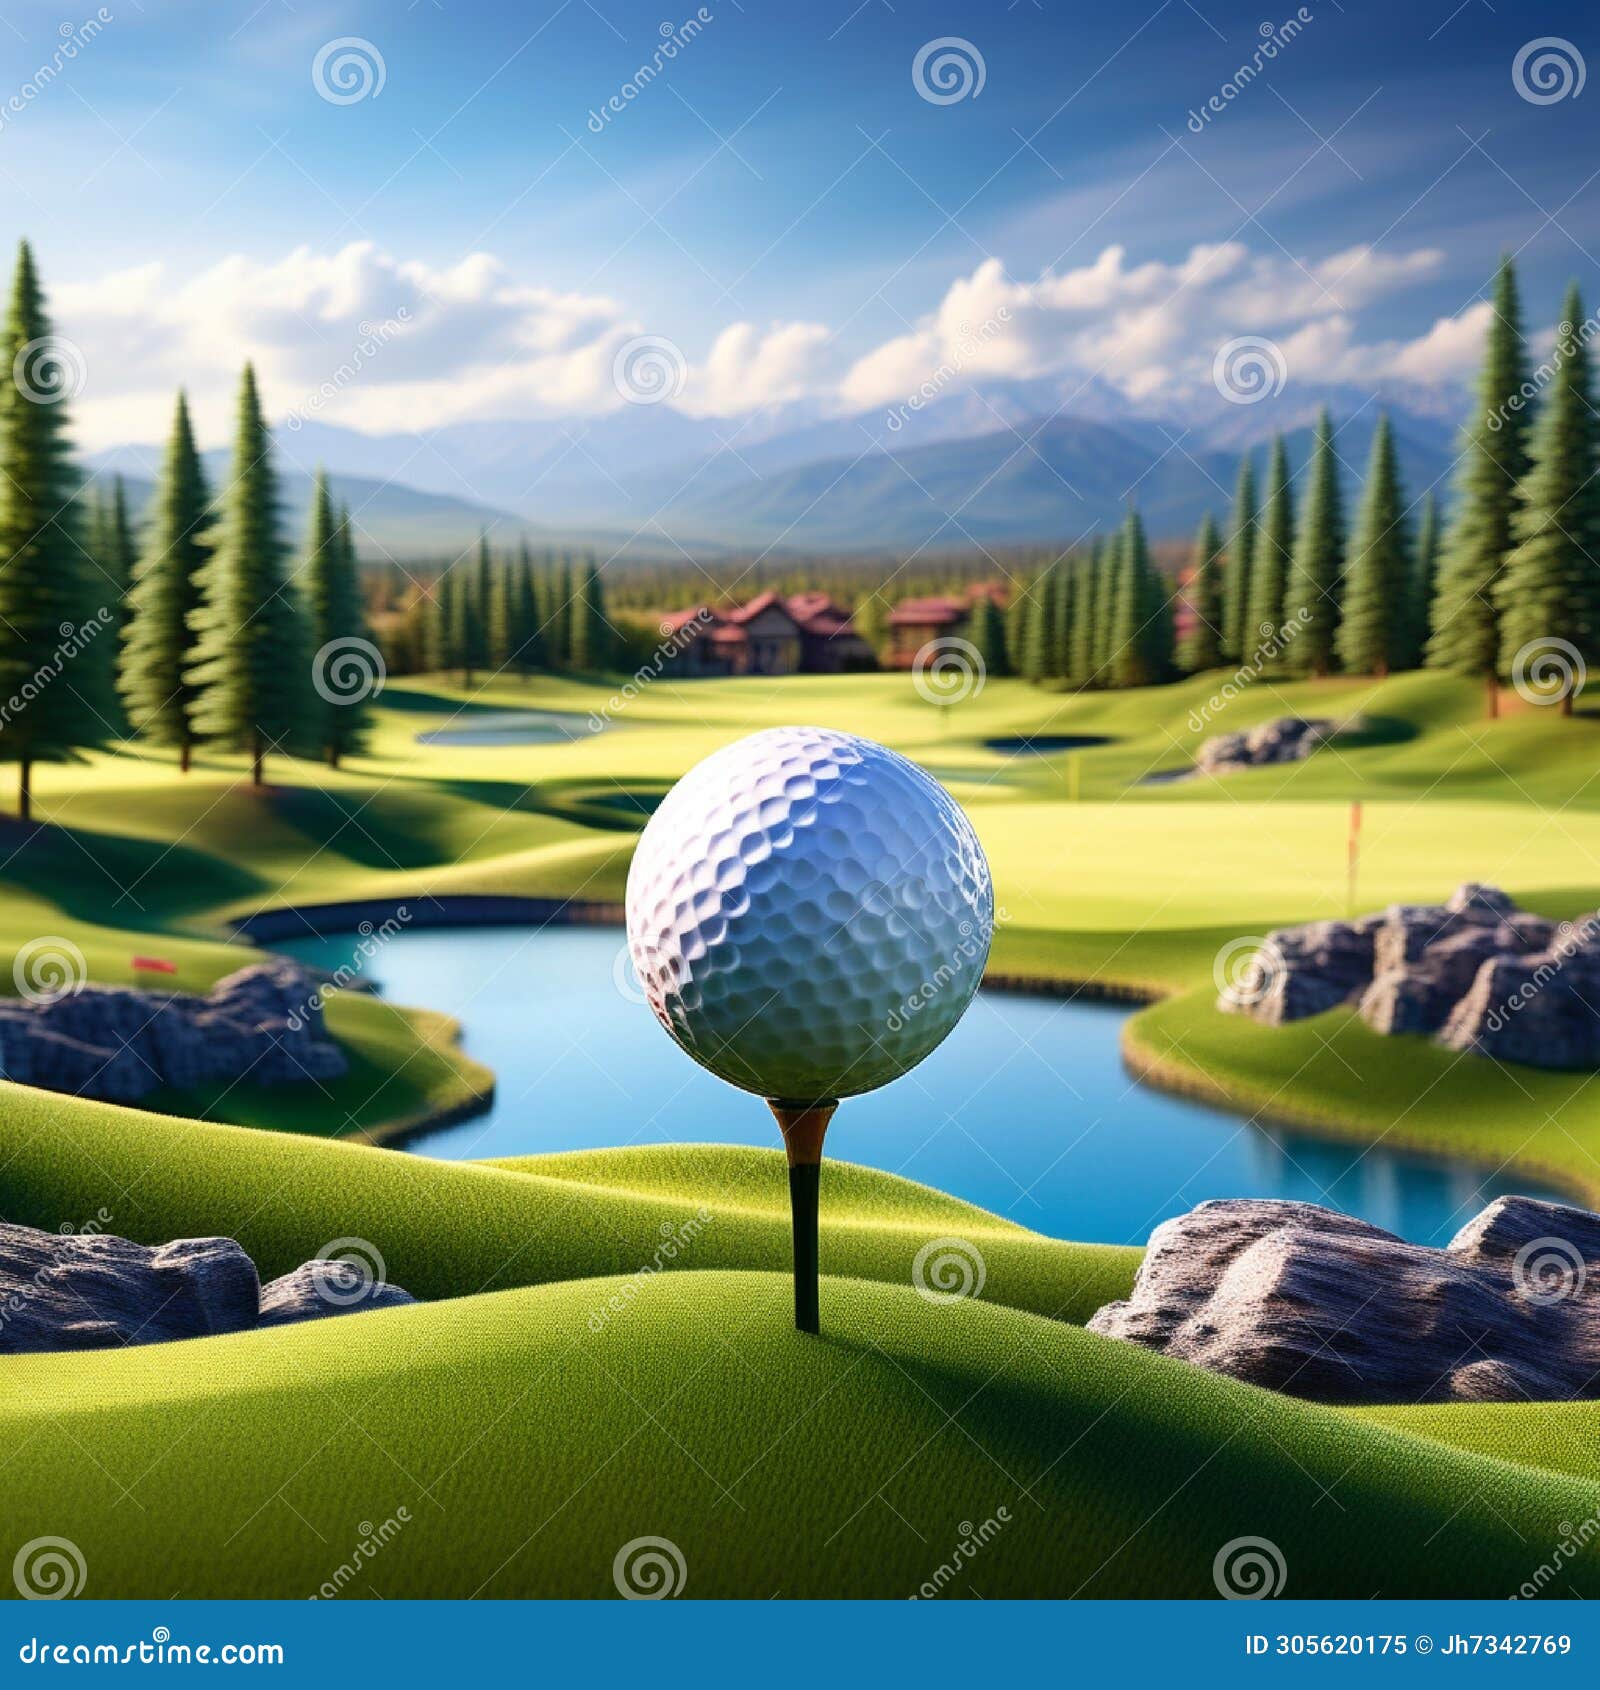 generate an artistic representation of a golf ball surrounded by vibrant golf course scenery tren